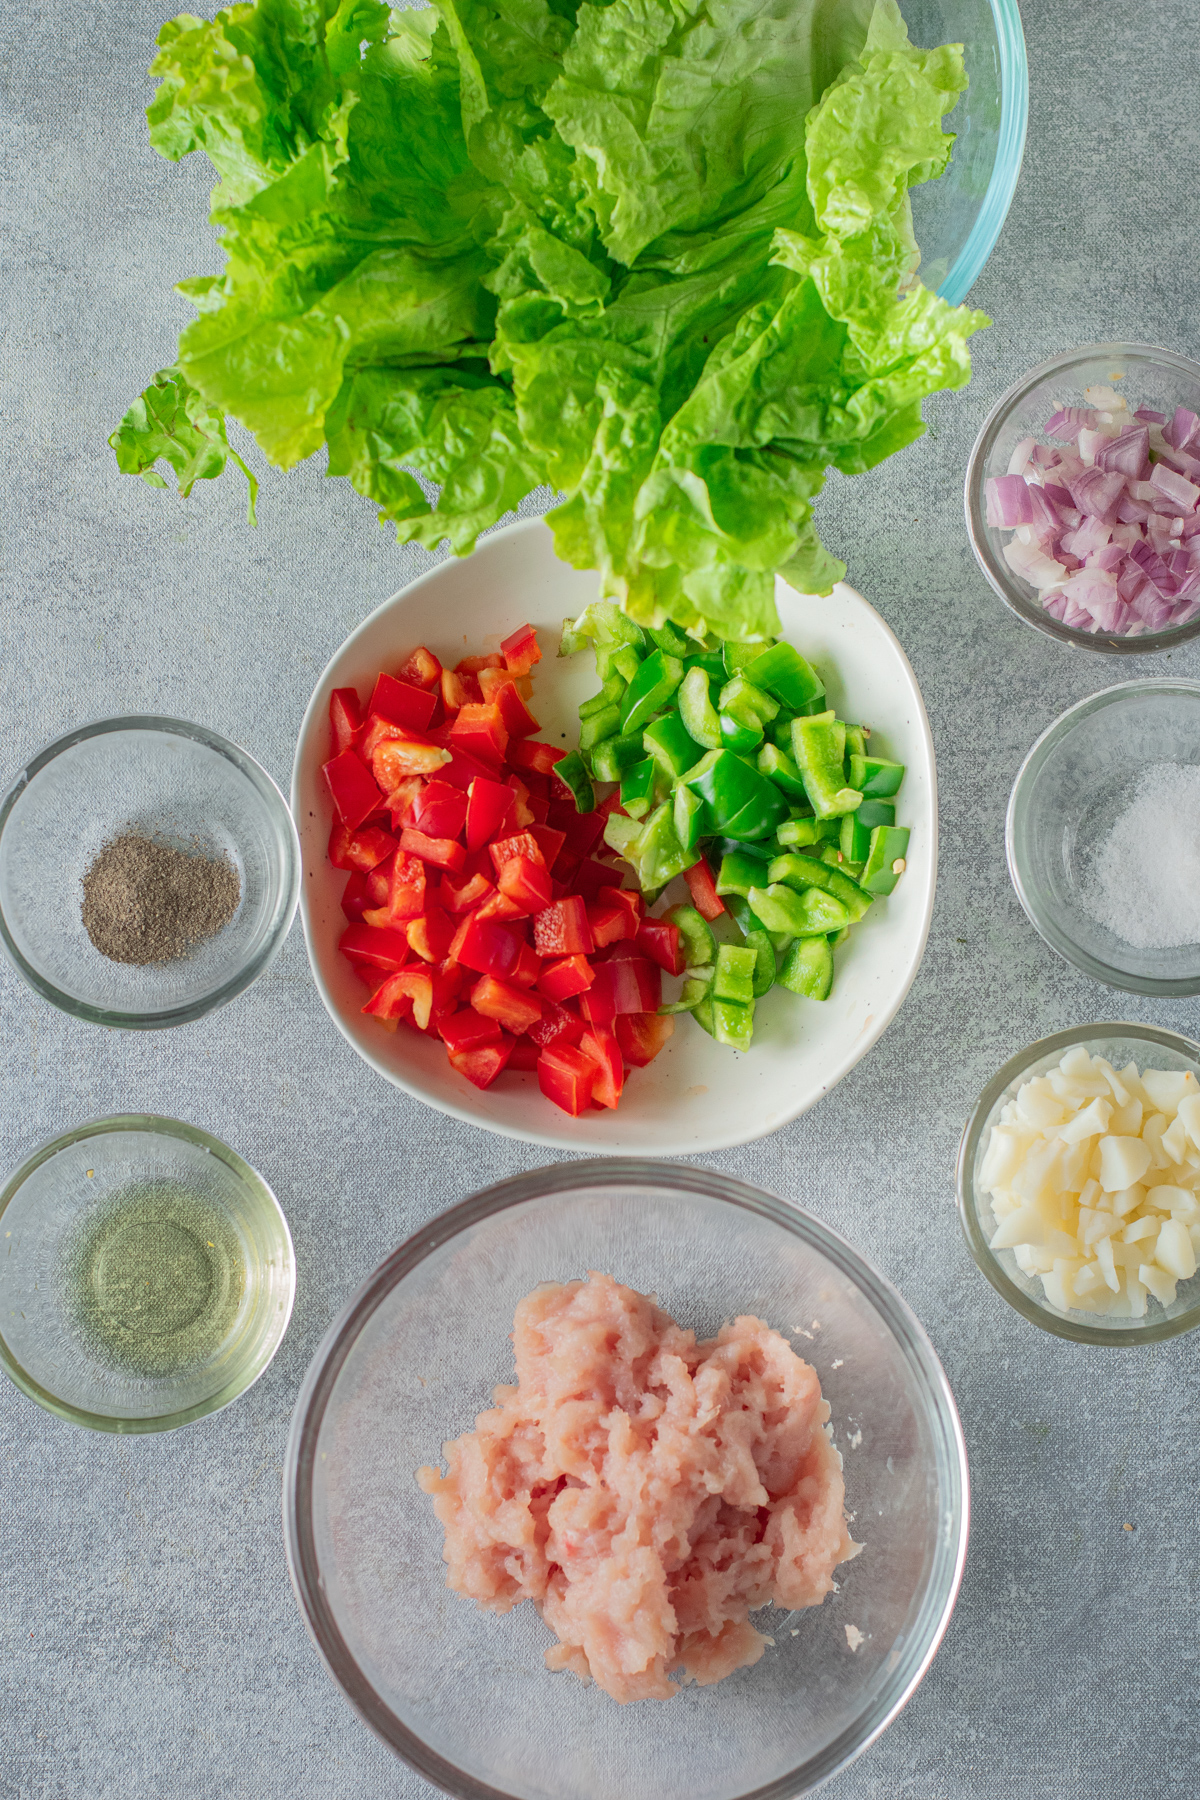 ingredients: bib lettuce, onion, chopped green and red bell peppers water chesnuts, seasonings, and chopped chicken